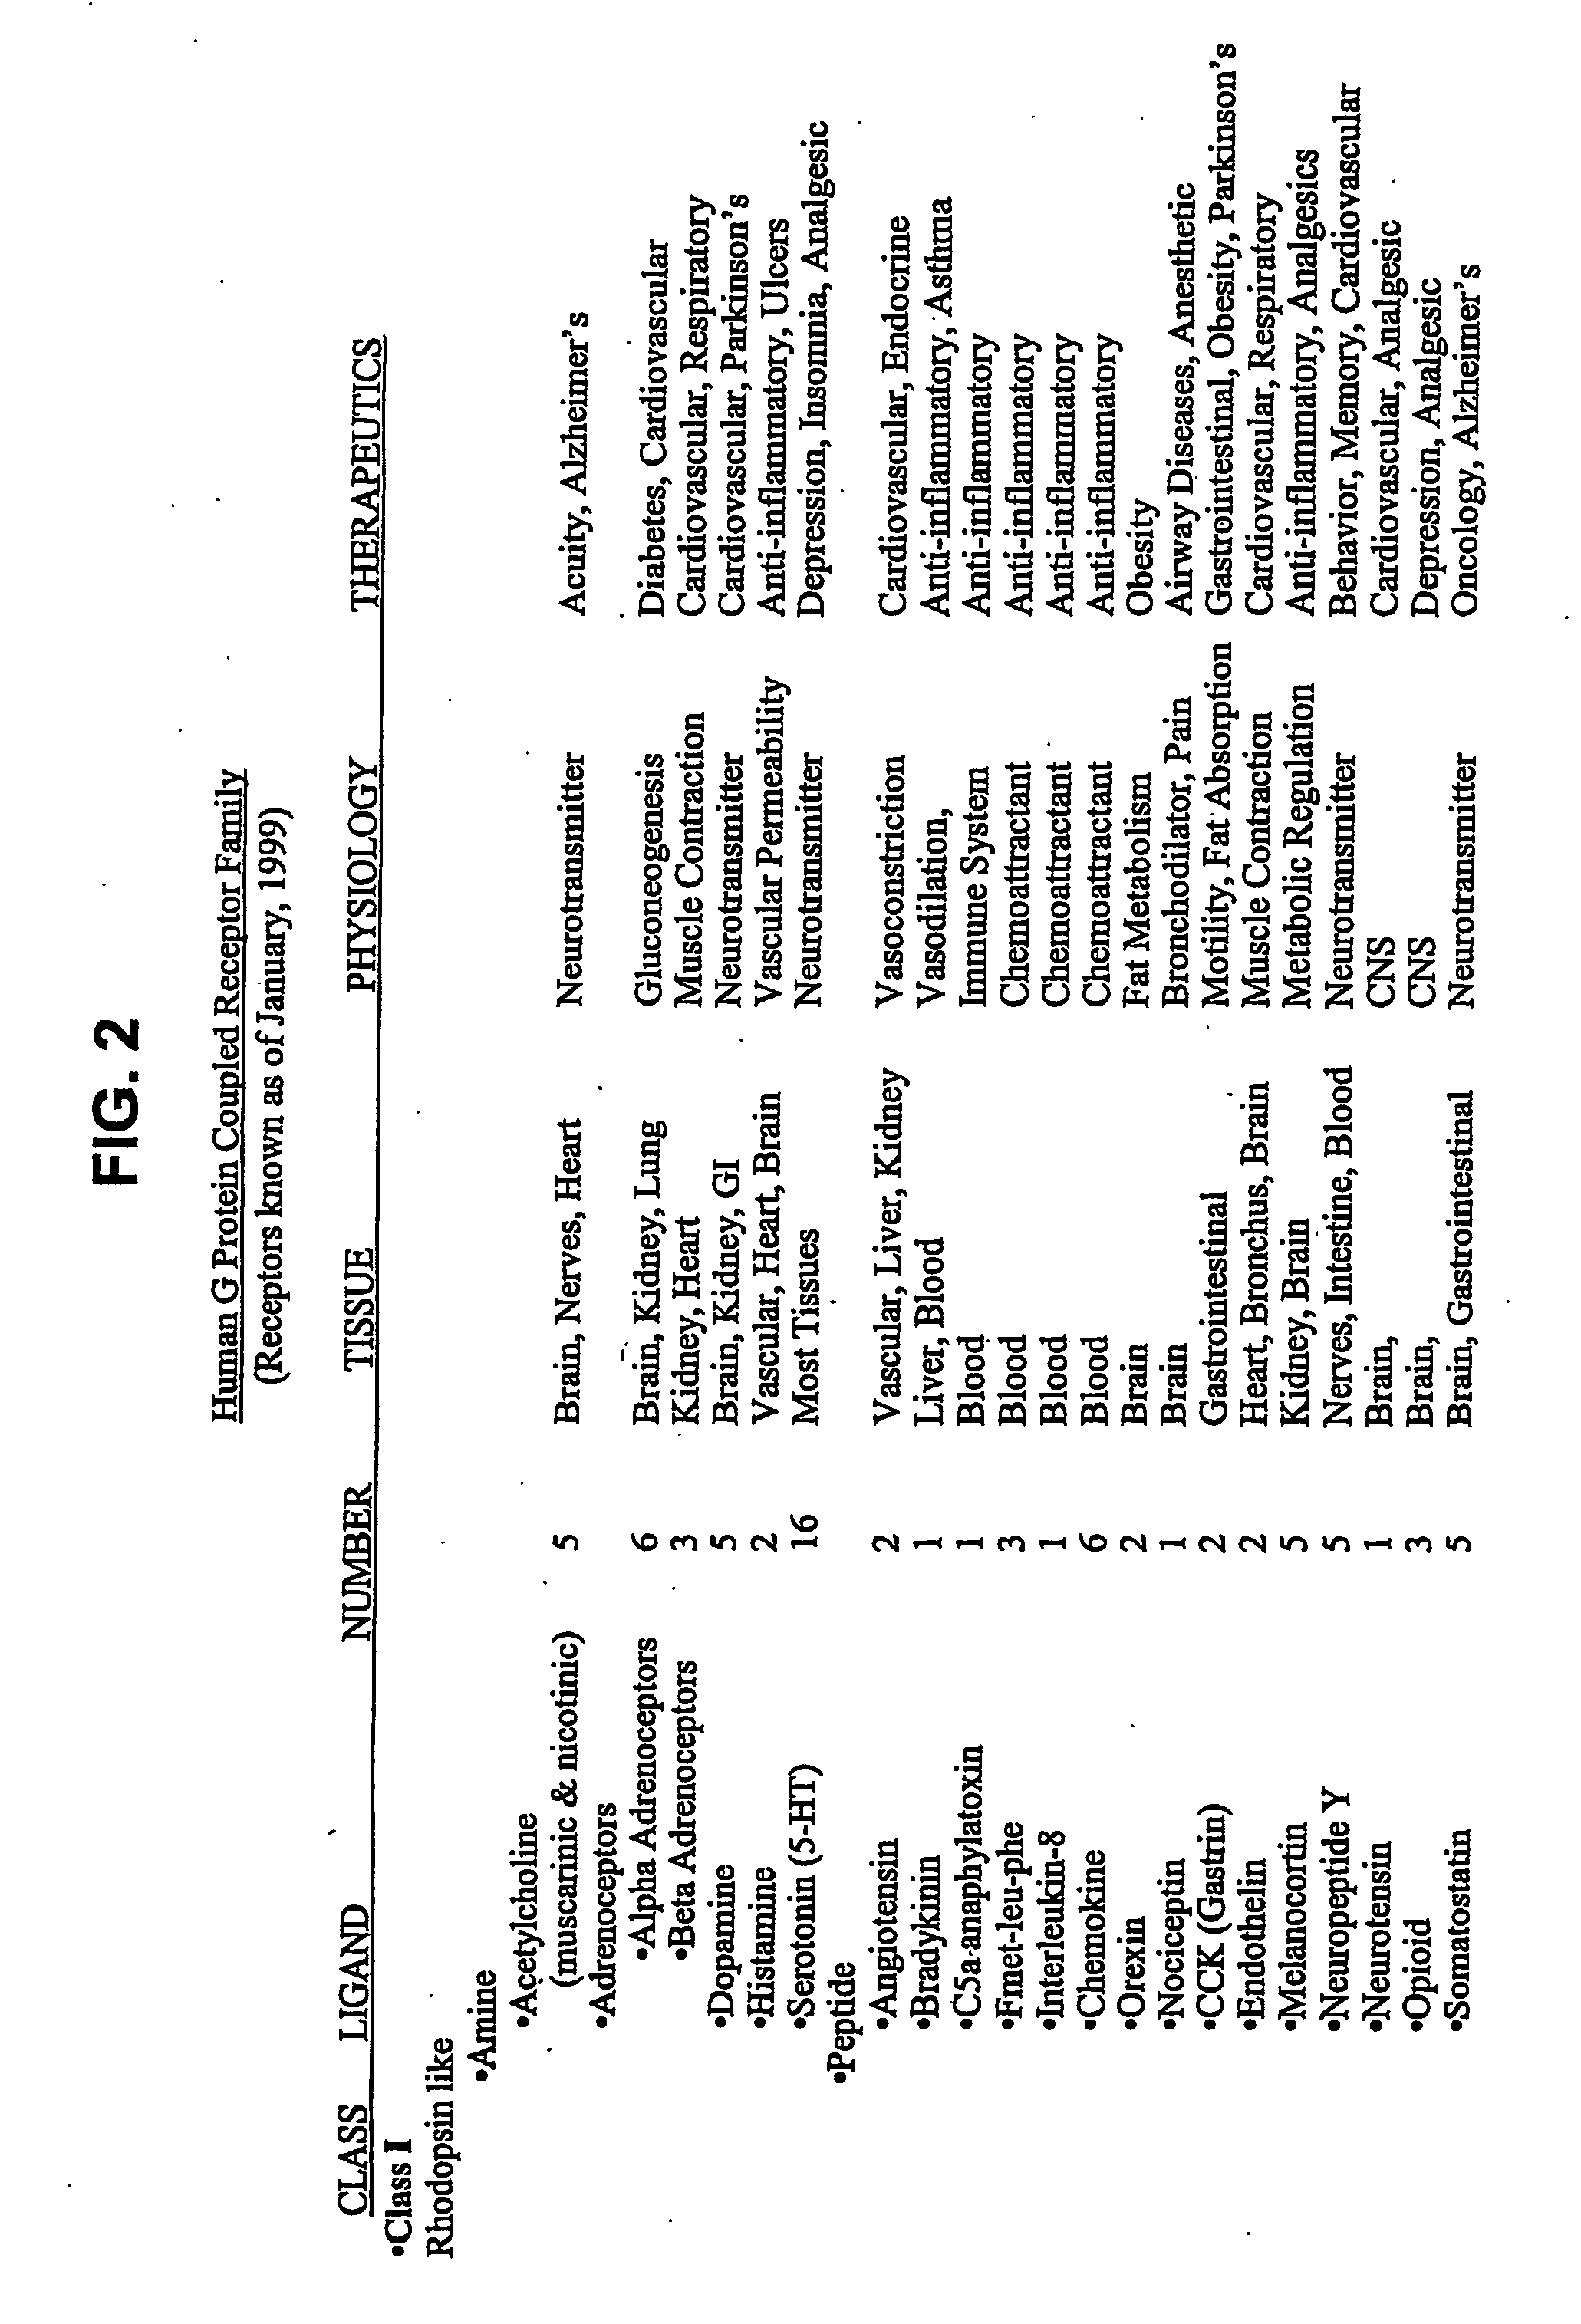 Methods Of Screening Compositions For G Protein-Coupled Receptors Aganist Agonists